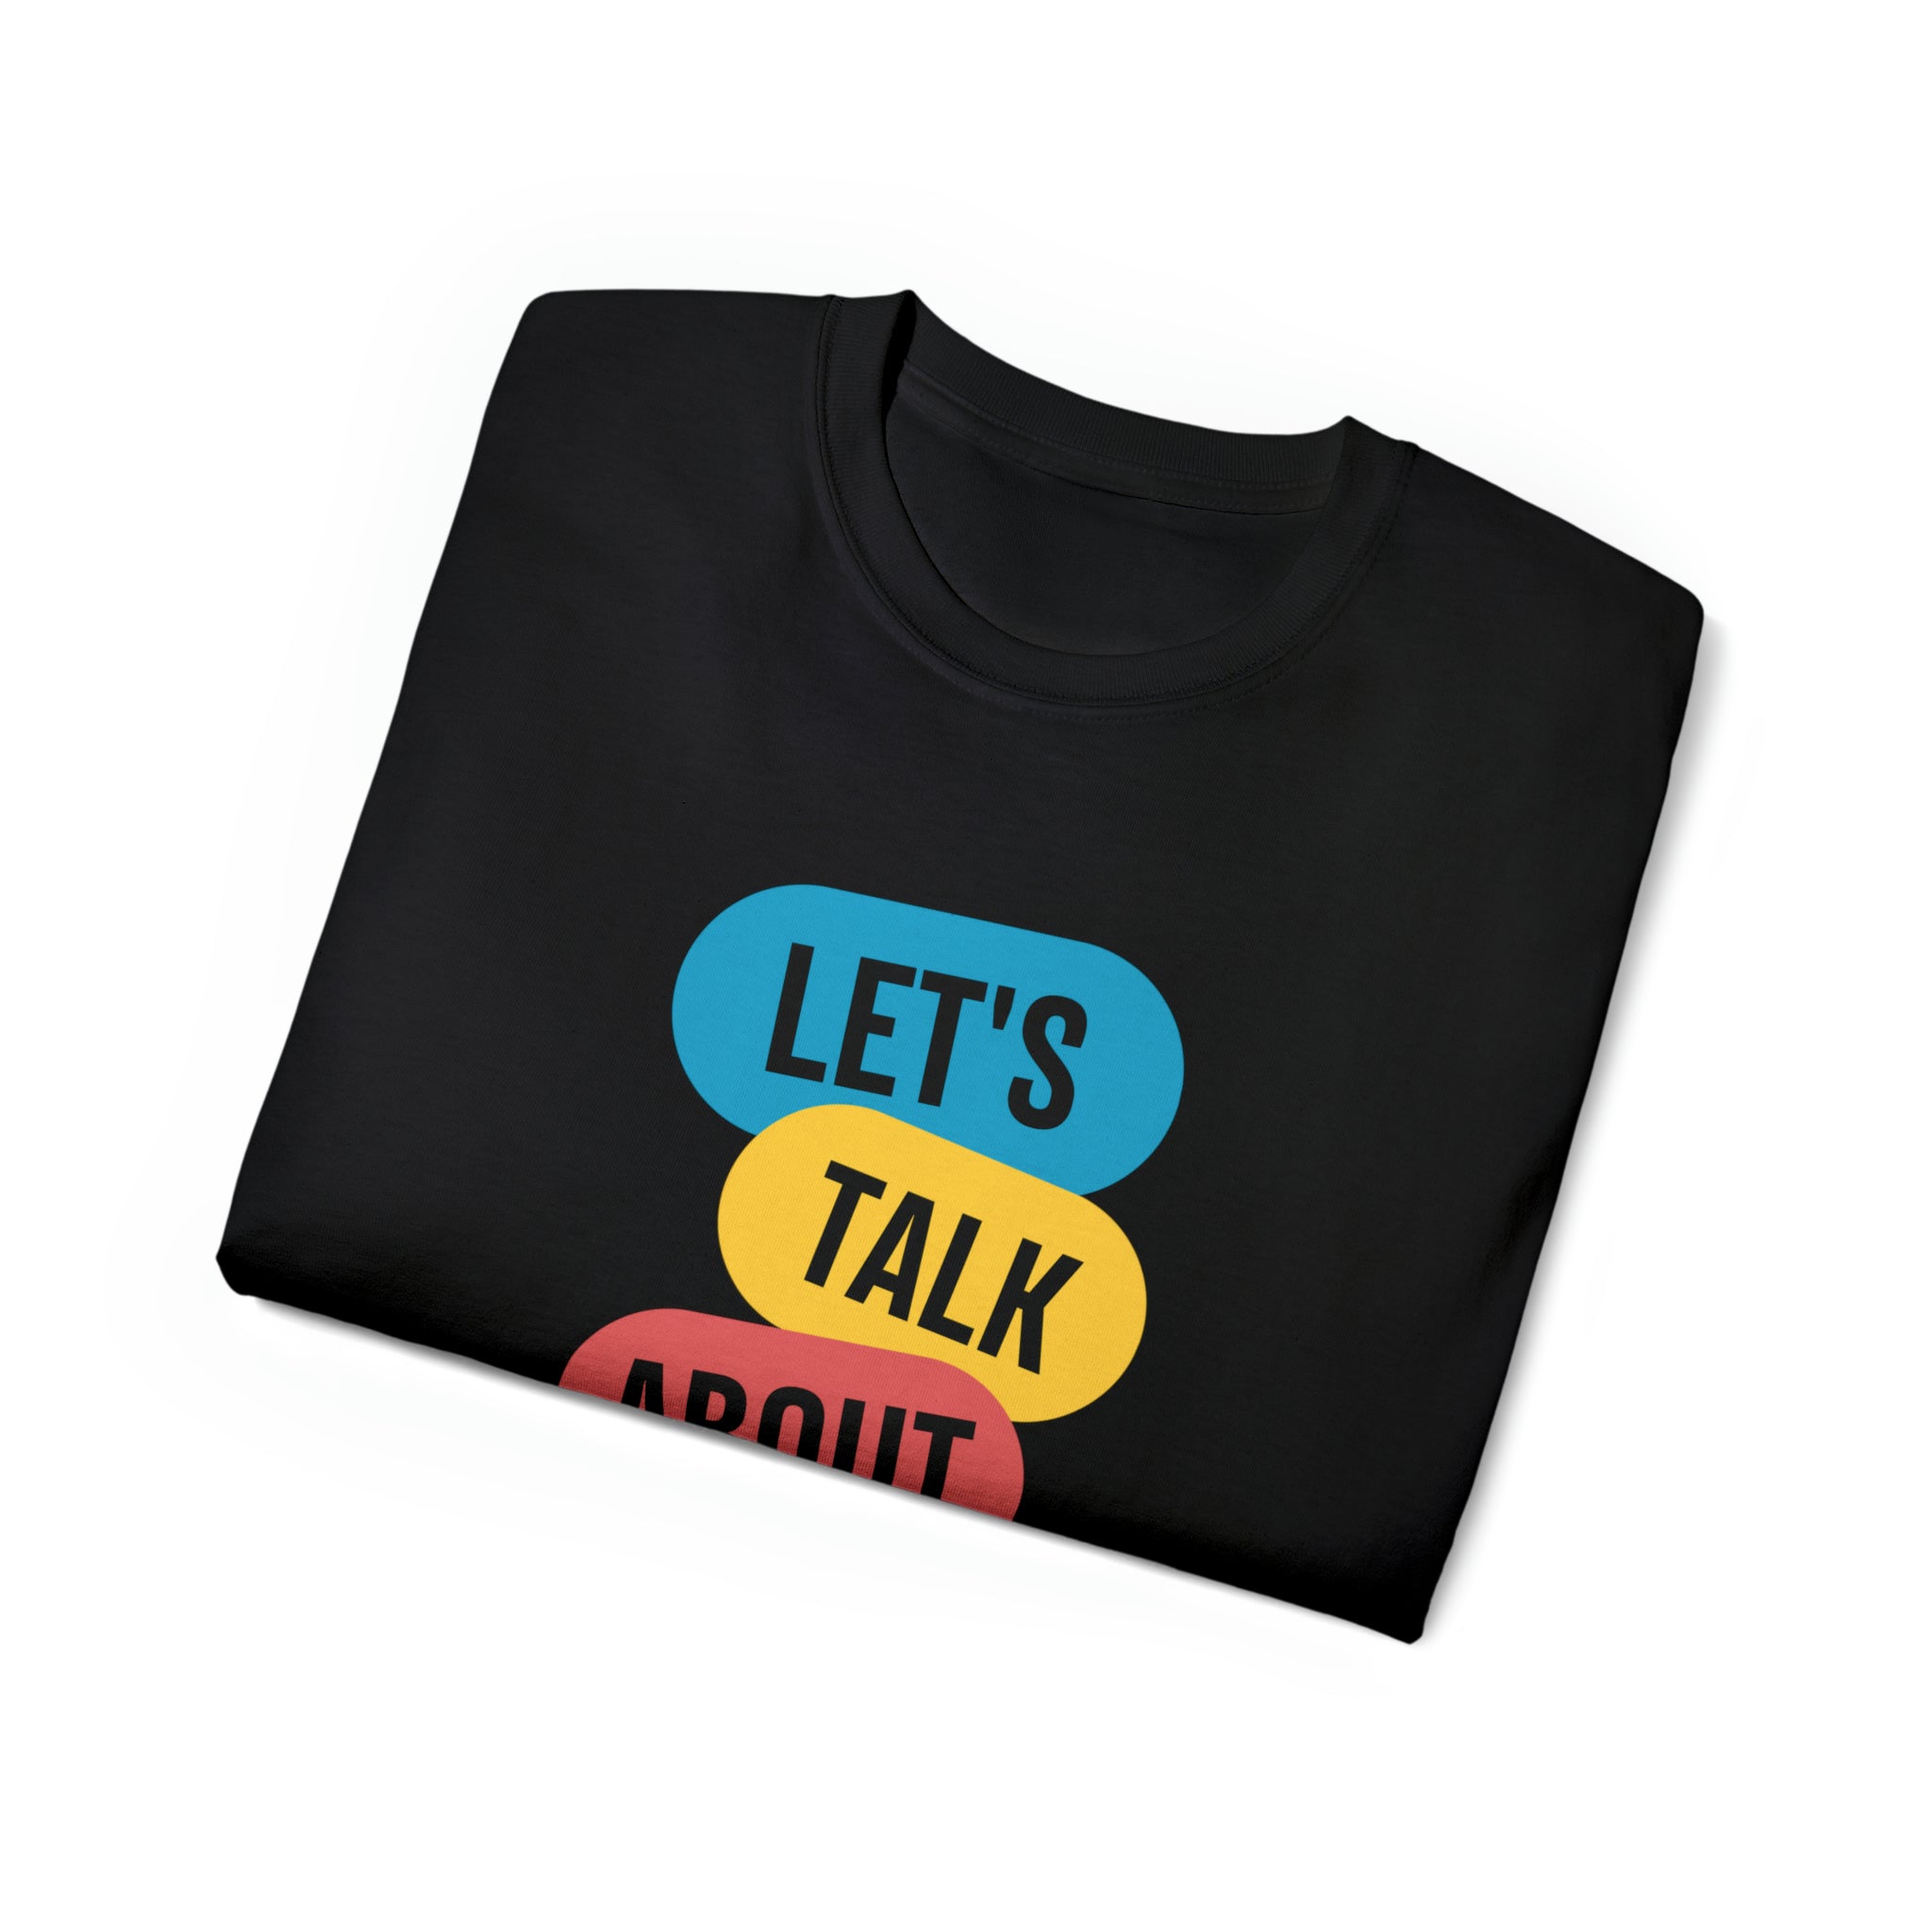 Let's Talk About It / End the Stigma Shirt